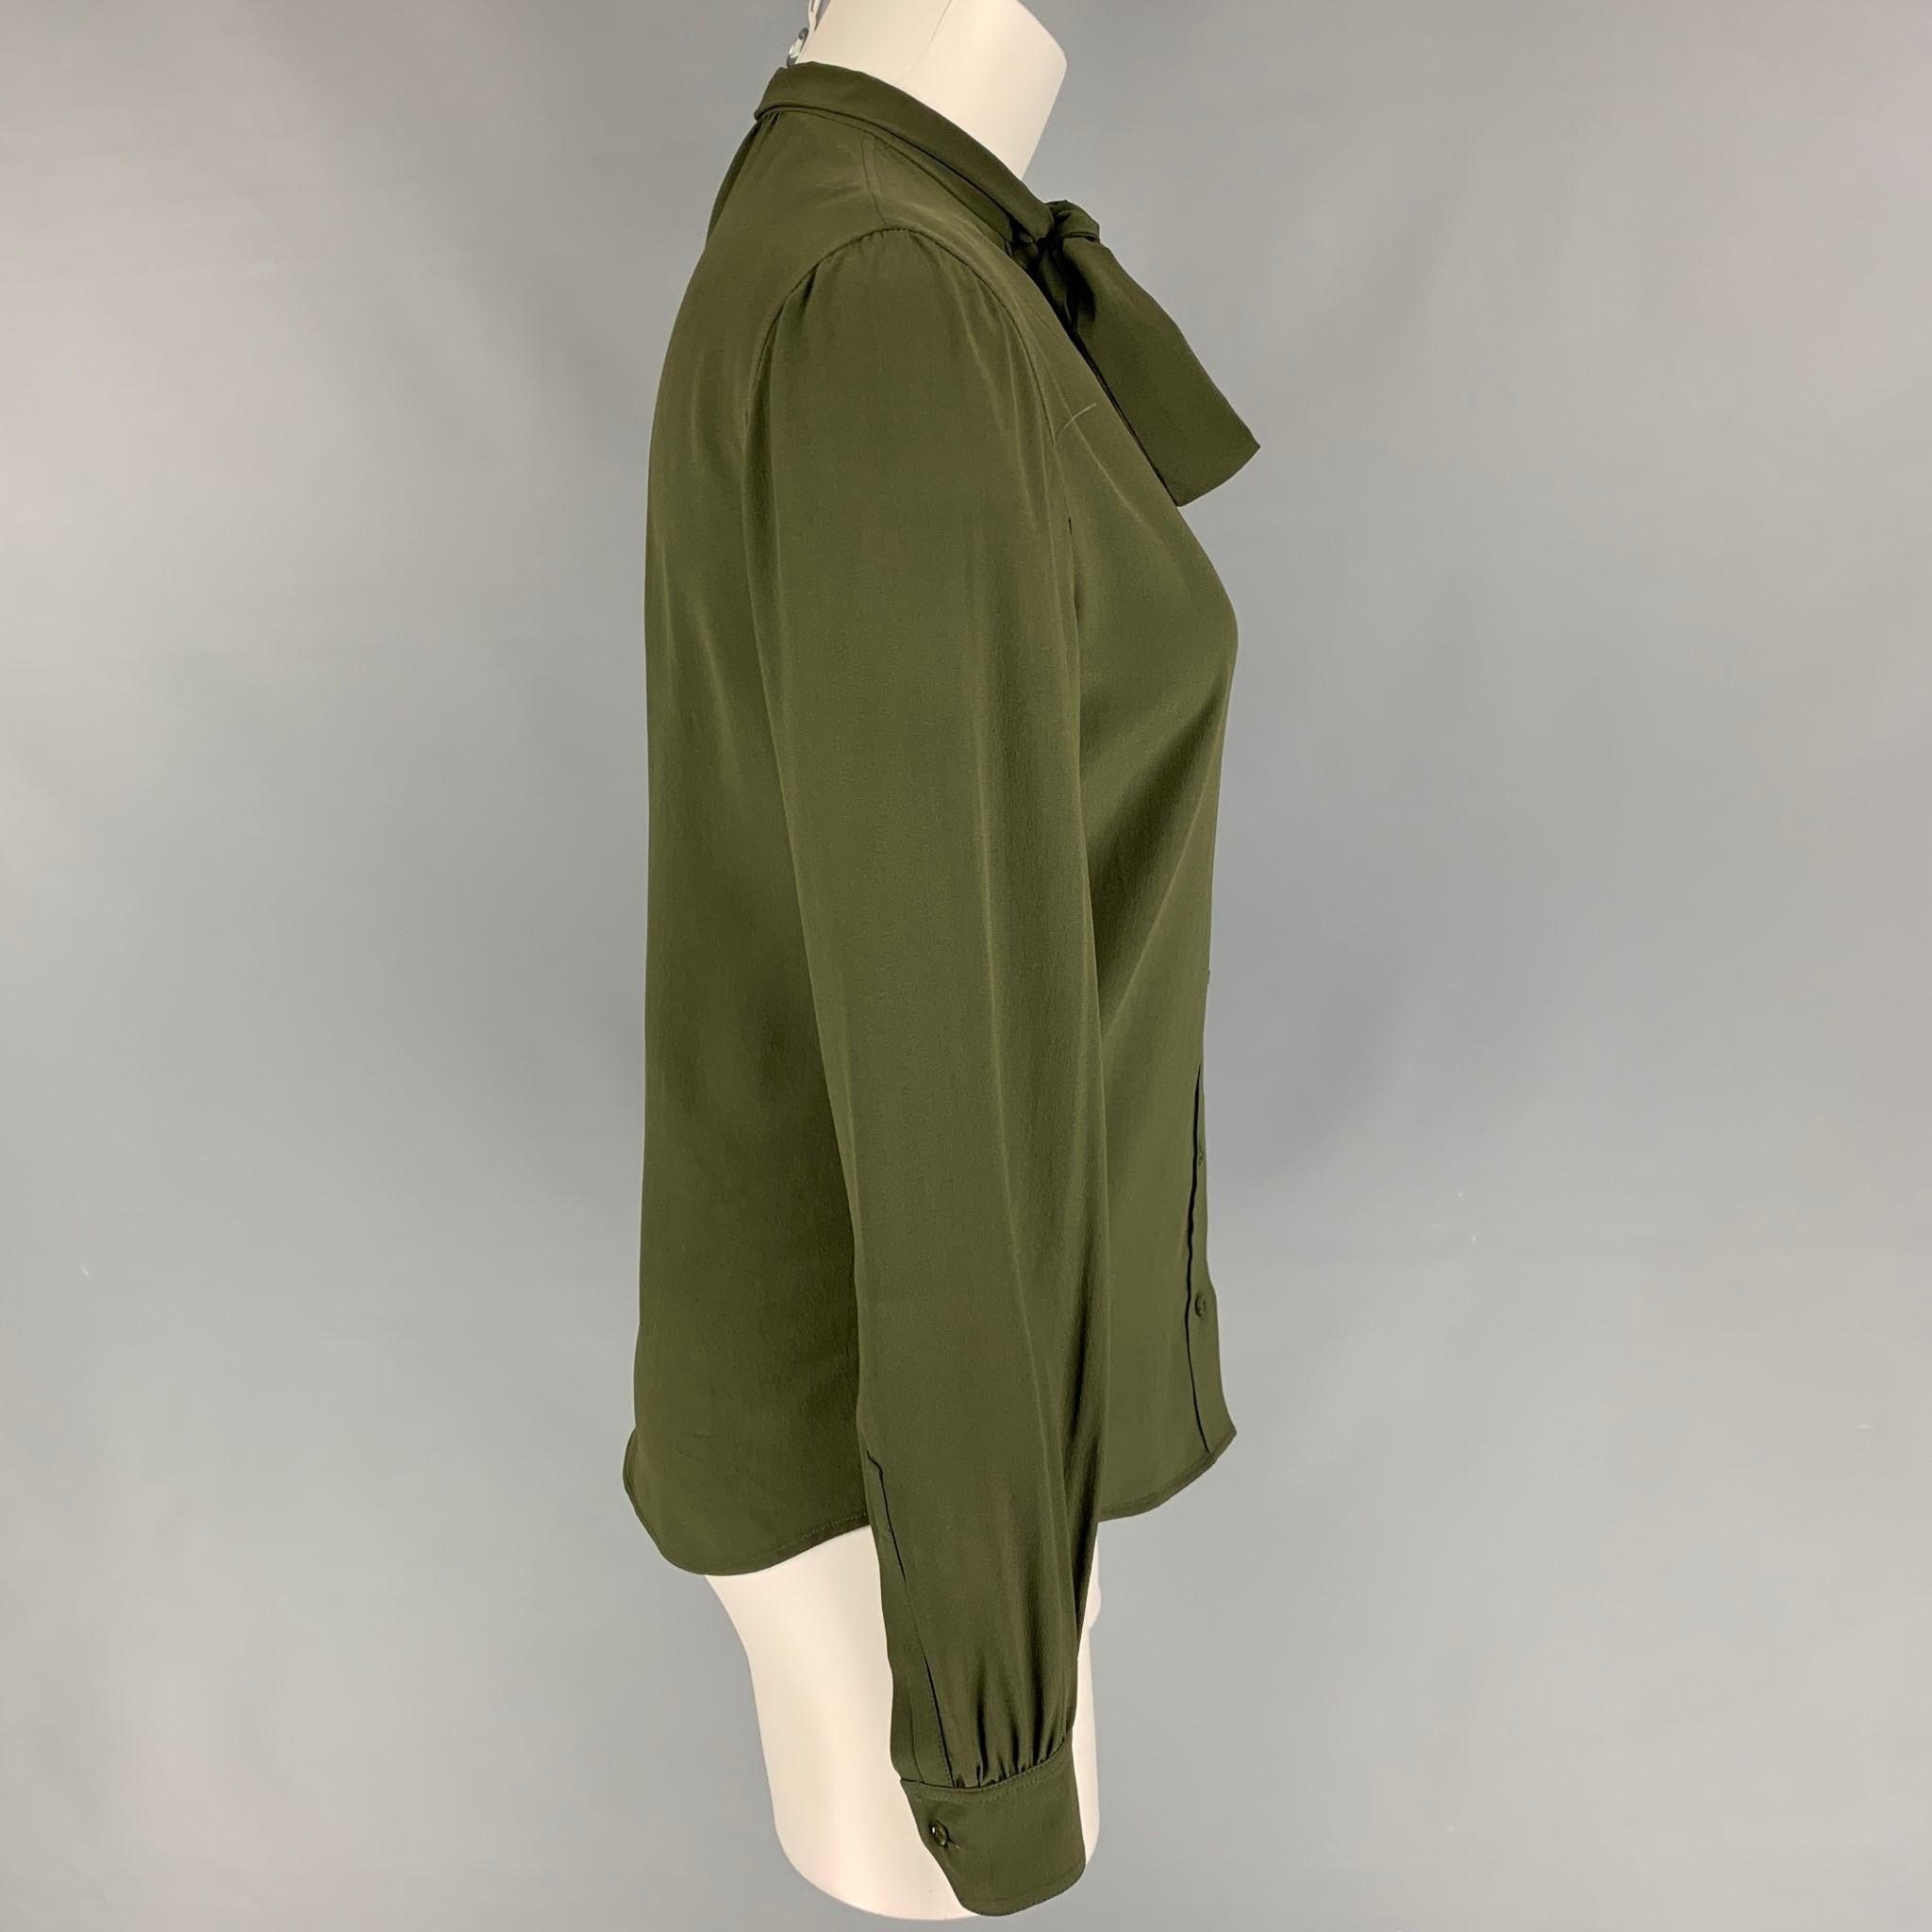 SAINT LAURENT blouse comes in a dark green silk featuring a front bow design, long sleeves, and a buttoned closure. Made in Italy. 

Excellent Pre-Owned Condition.
Marked: F 36

Measurements:

Shoulder: 16 in.
Bust: 34 in.
Sleeve: 25 in.
Length: